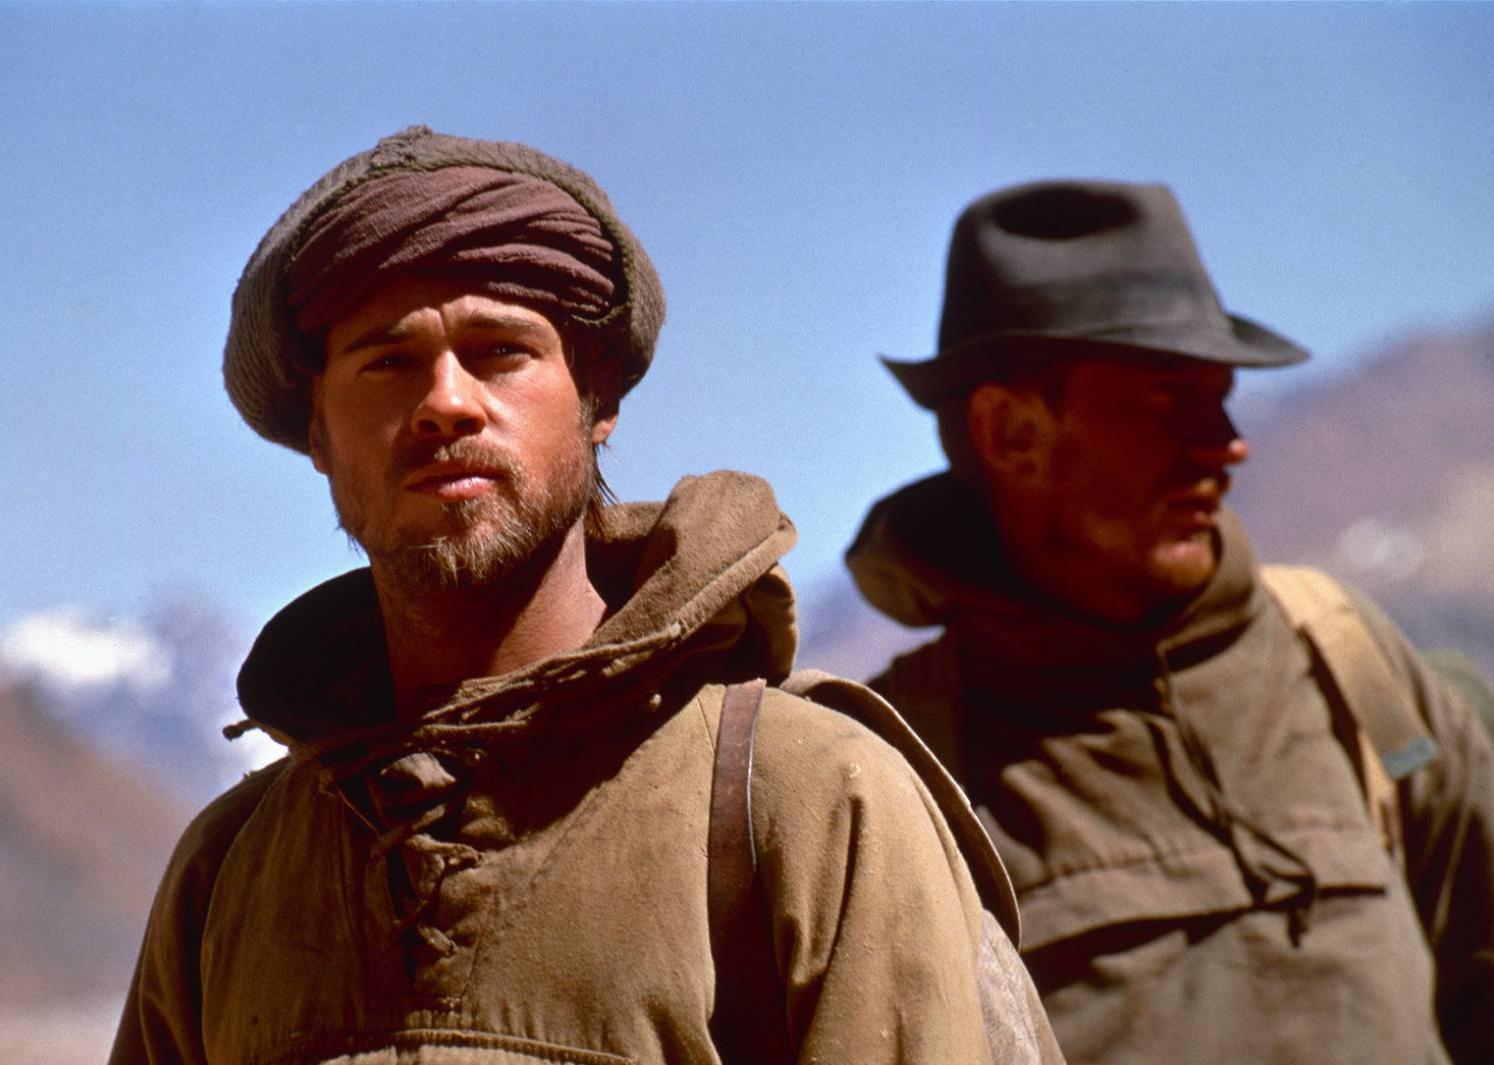 Brad Pitt and David Thewlis hiking in dark green coats and head coverings in the mountains with beards.